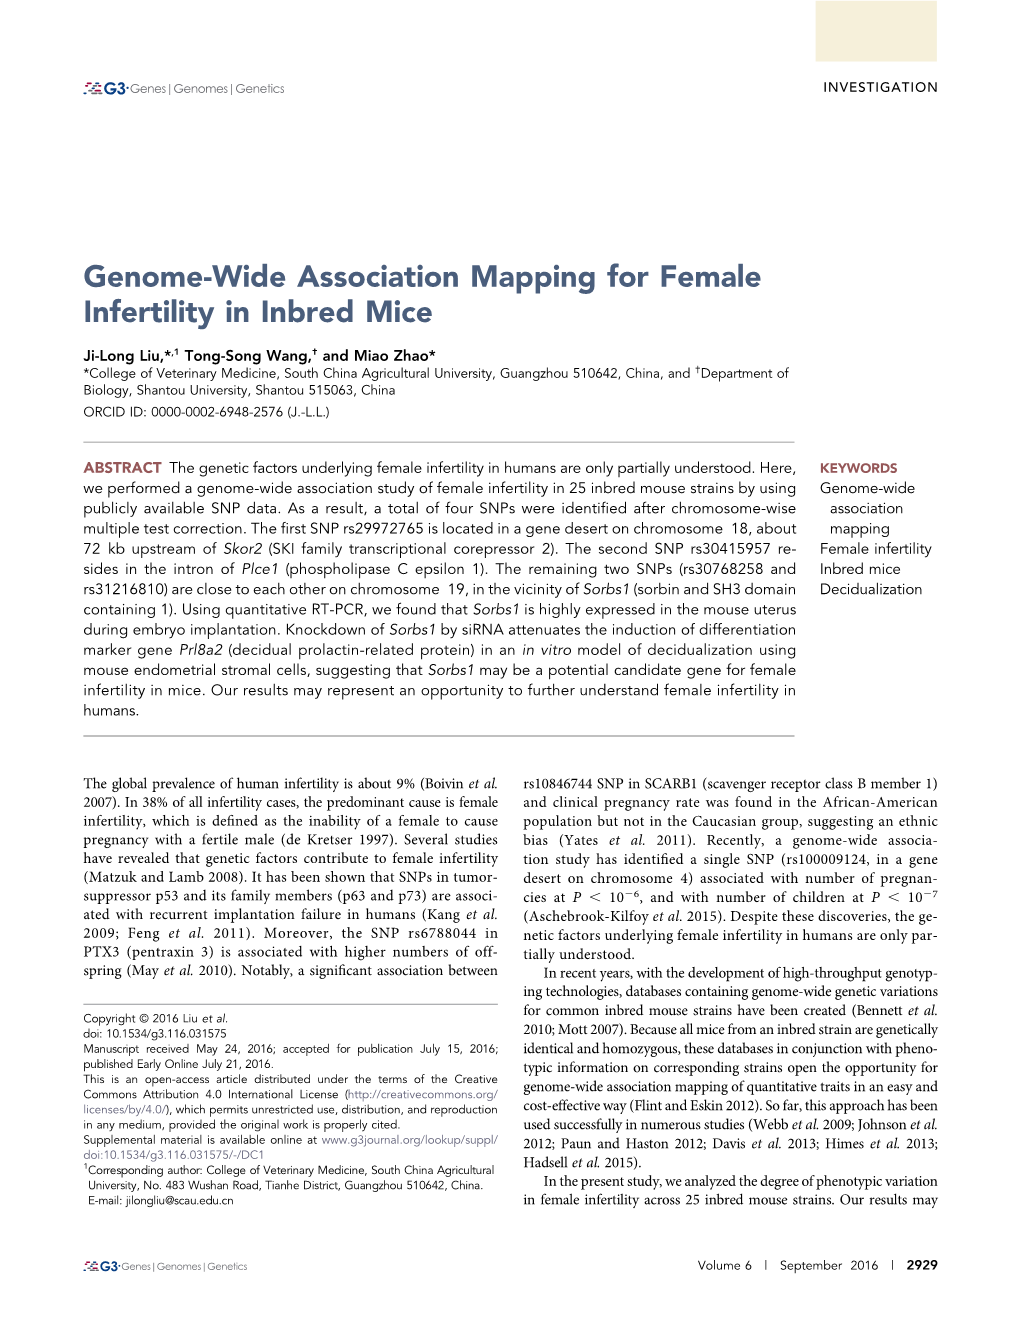 Genome-Wide Association Mapping for Female Infertility in Inbred Mice